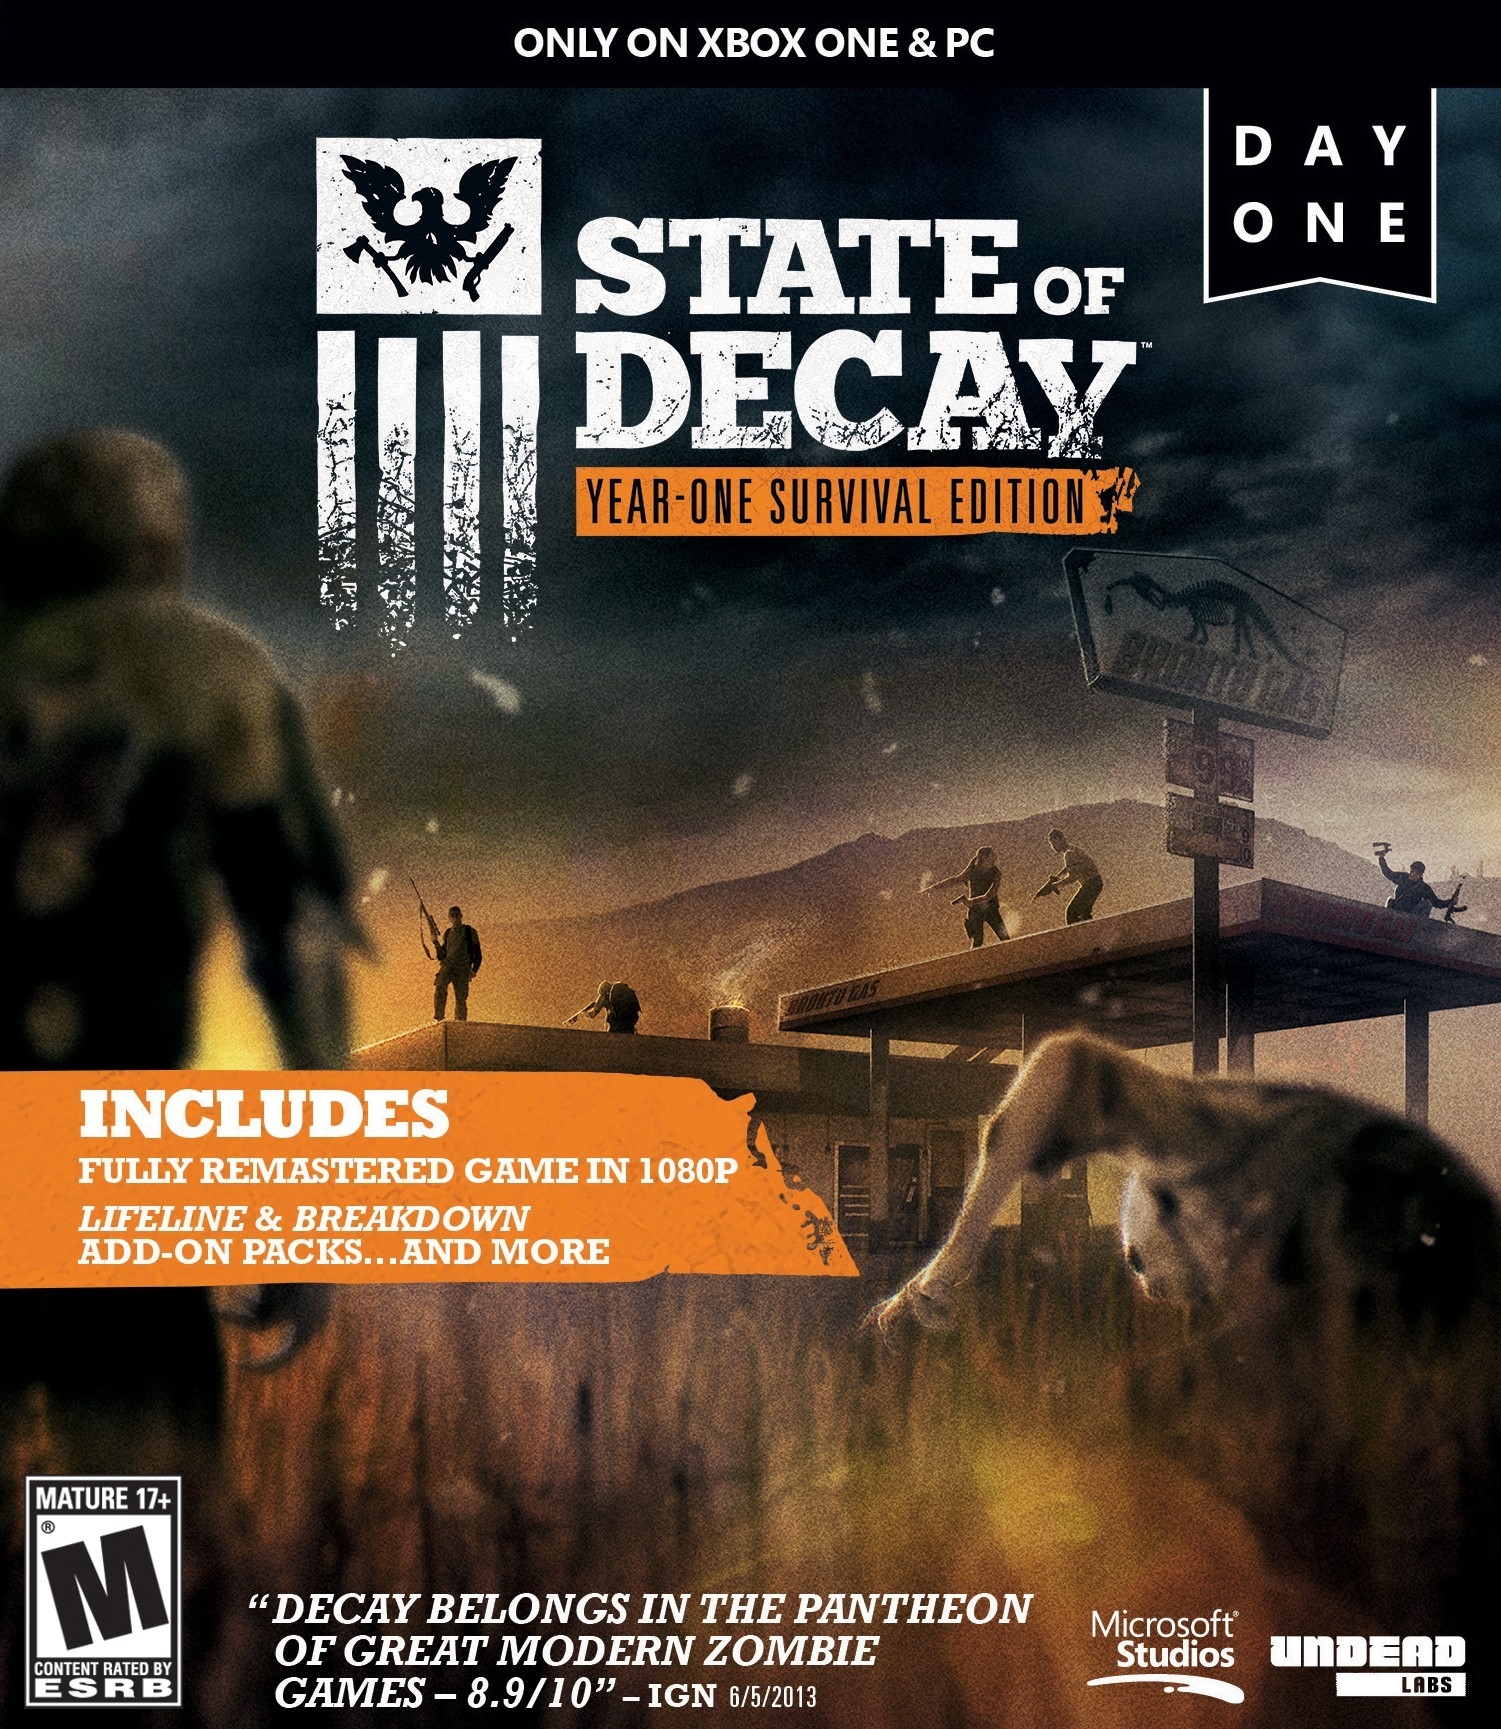 state of decay year one survival edition pc rebar